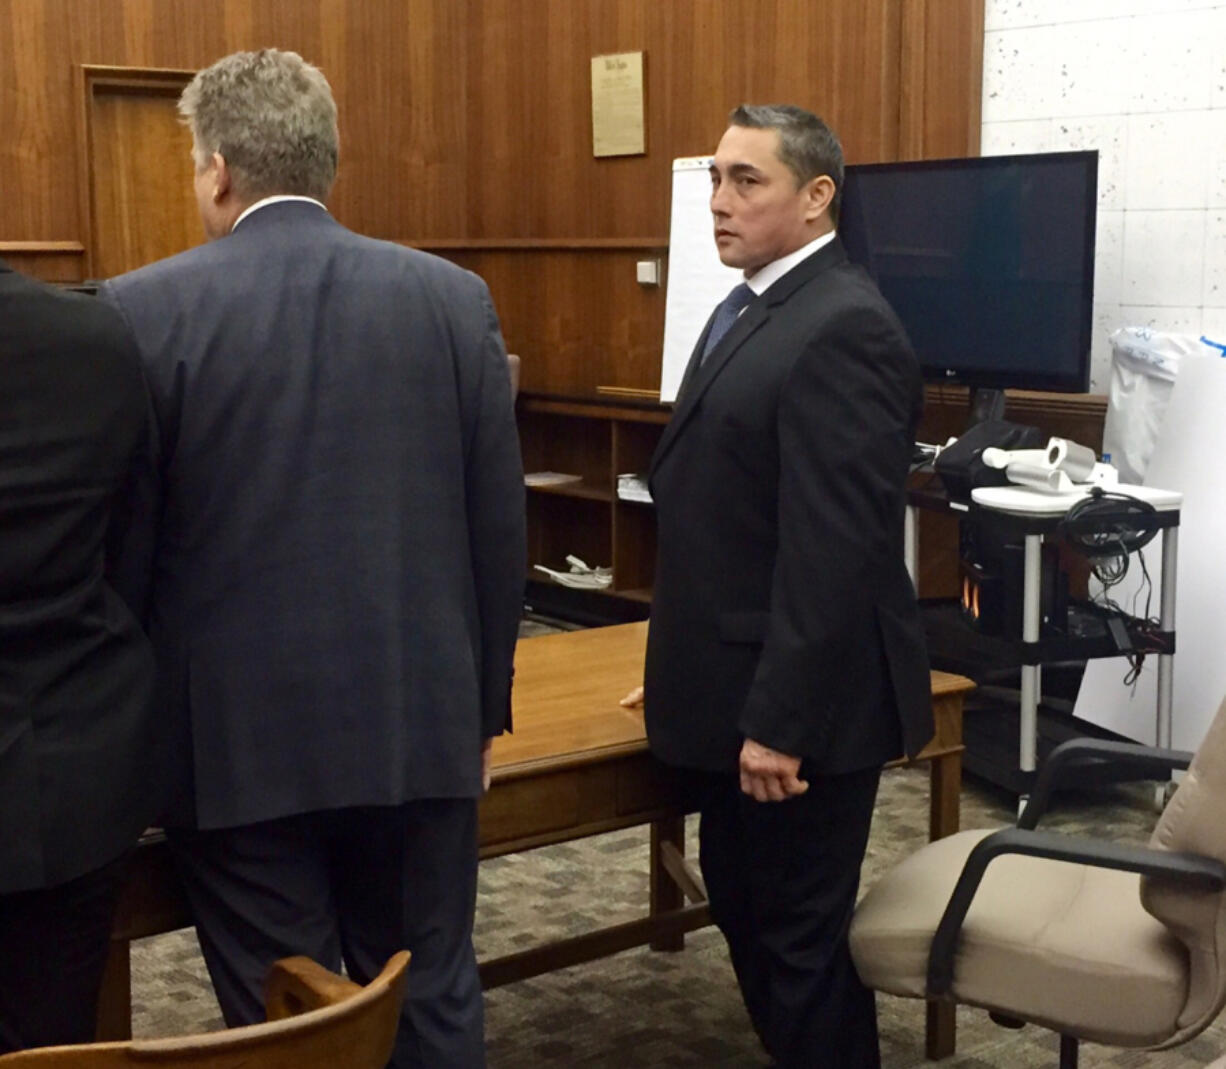 Dean Imokawa of Battle Ground takes in the news of a guilty verdict in his vehicular homicide trial in January 2017.